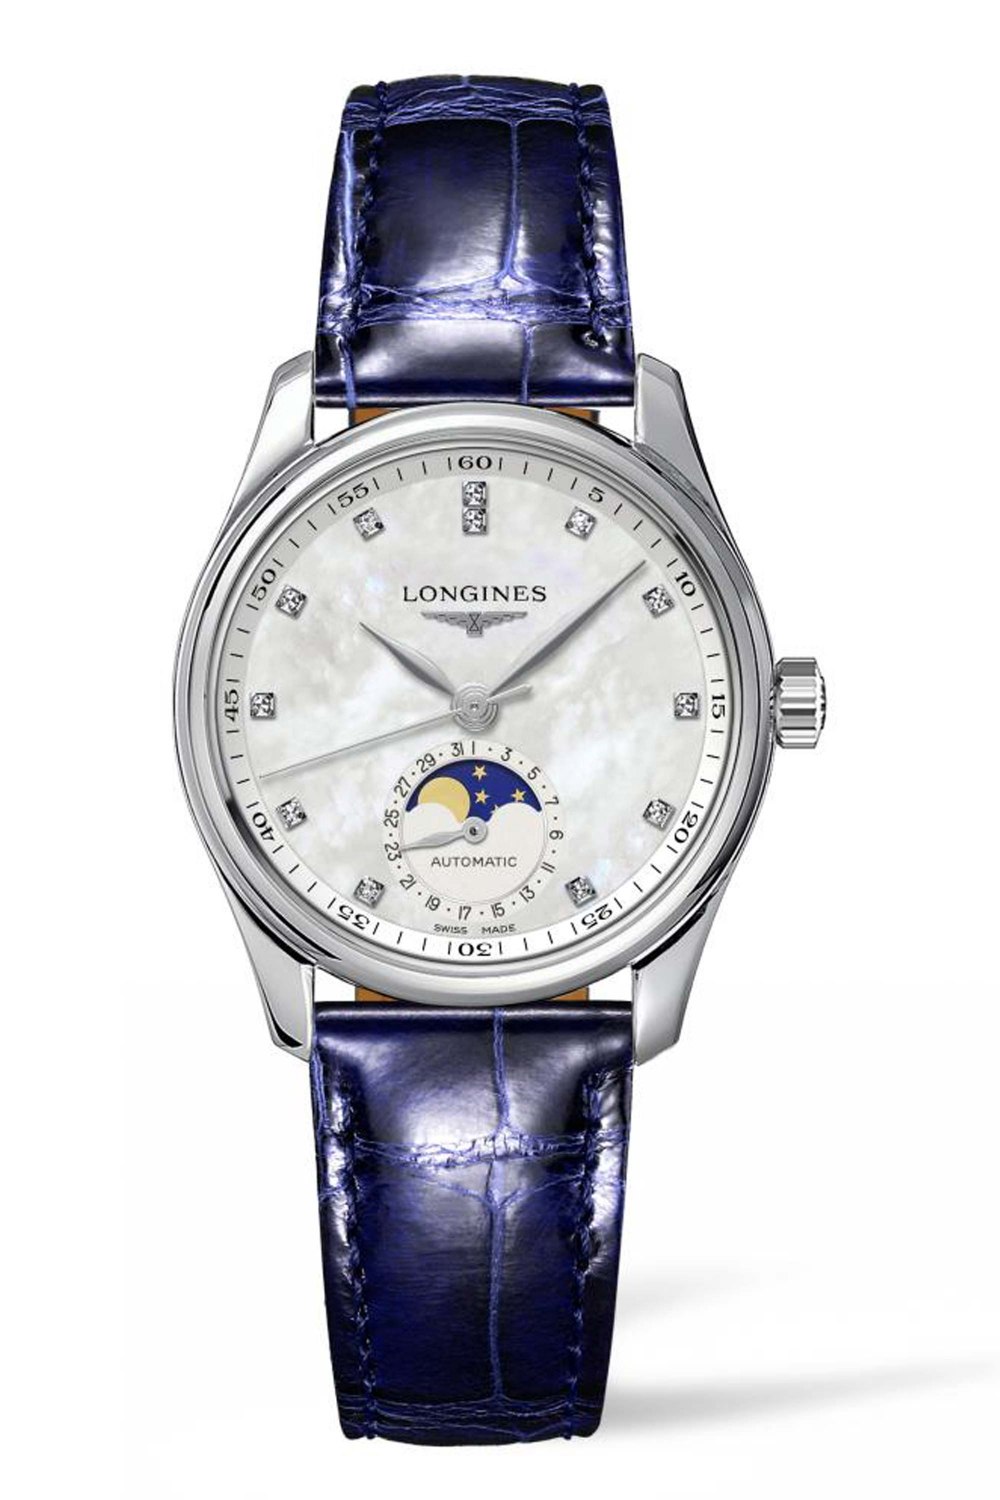 LONGINES - The Longines Master Collection